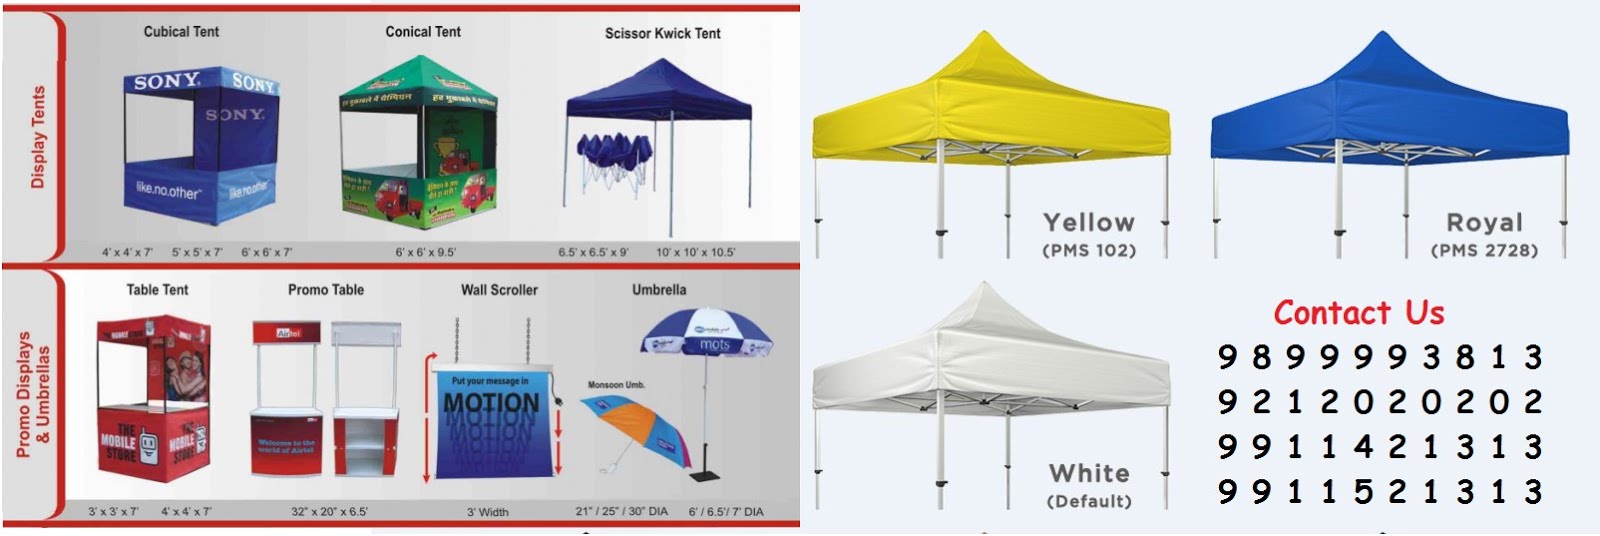 Manufacturers Booth Canopy Tents, Garden Canopy Tents, Conical Canopy Tents, Commercial Canopy.